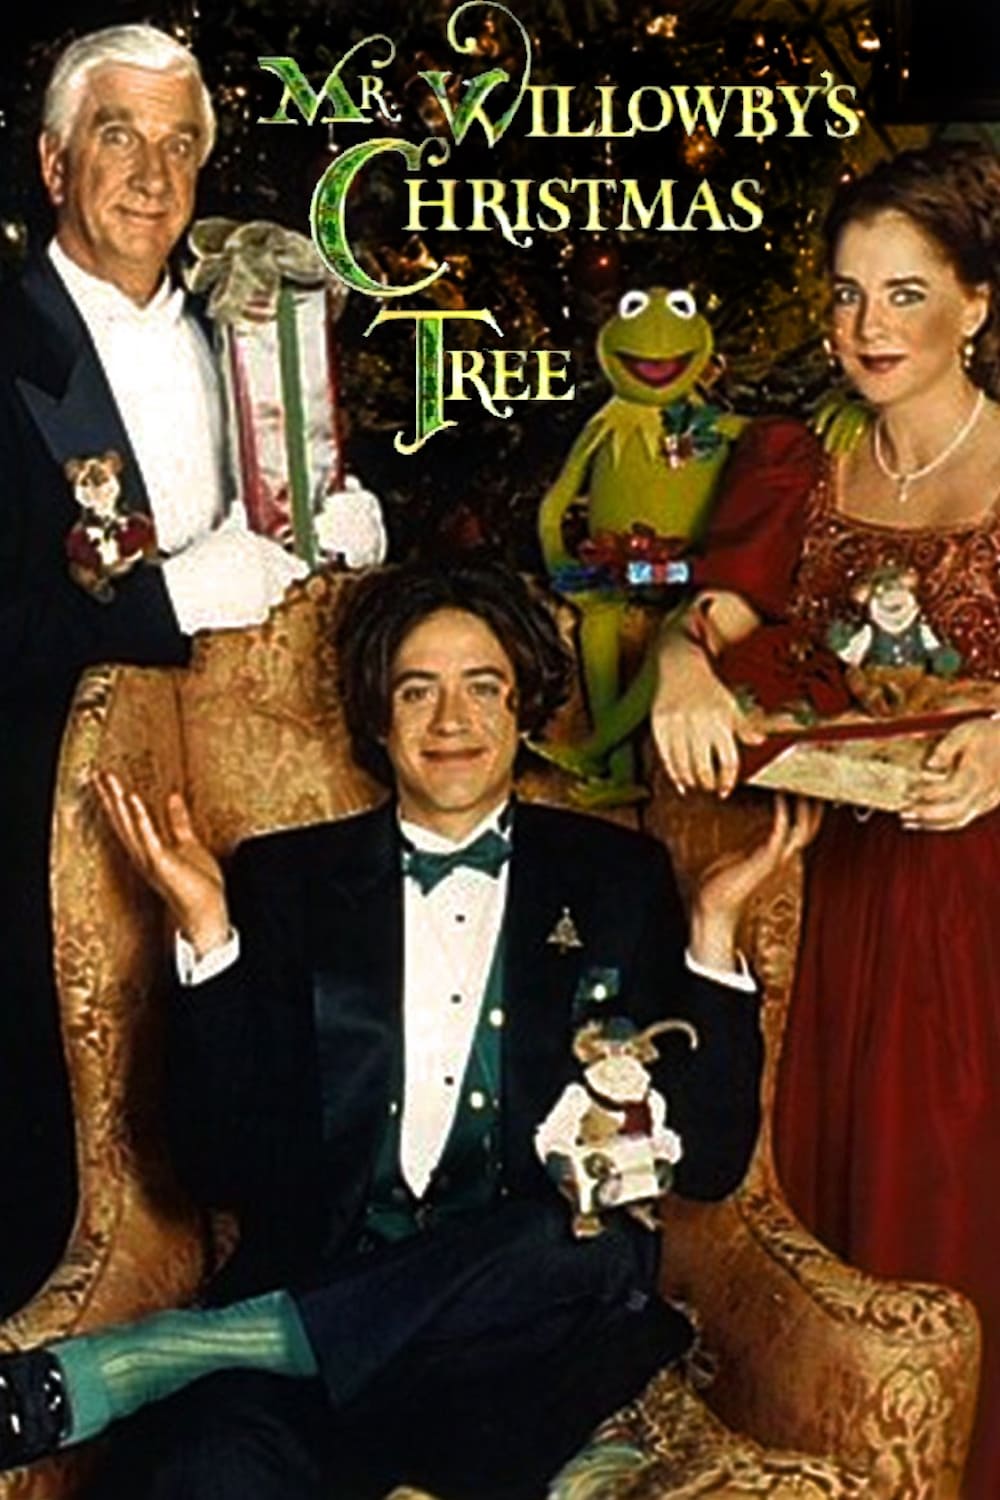 Mr. Willowby's Christmas Tree (1995)